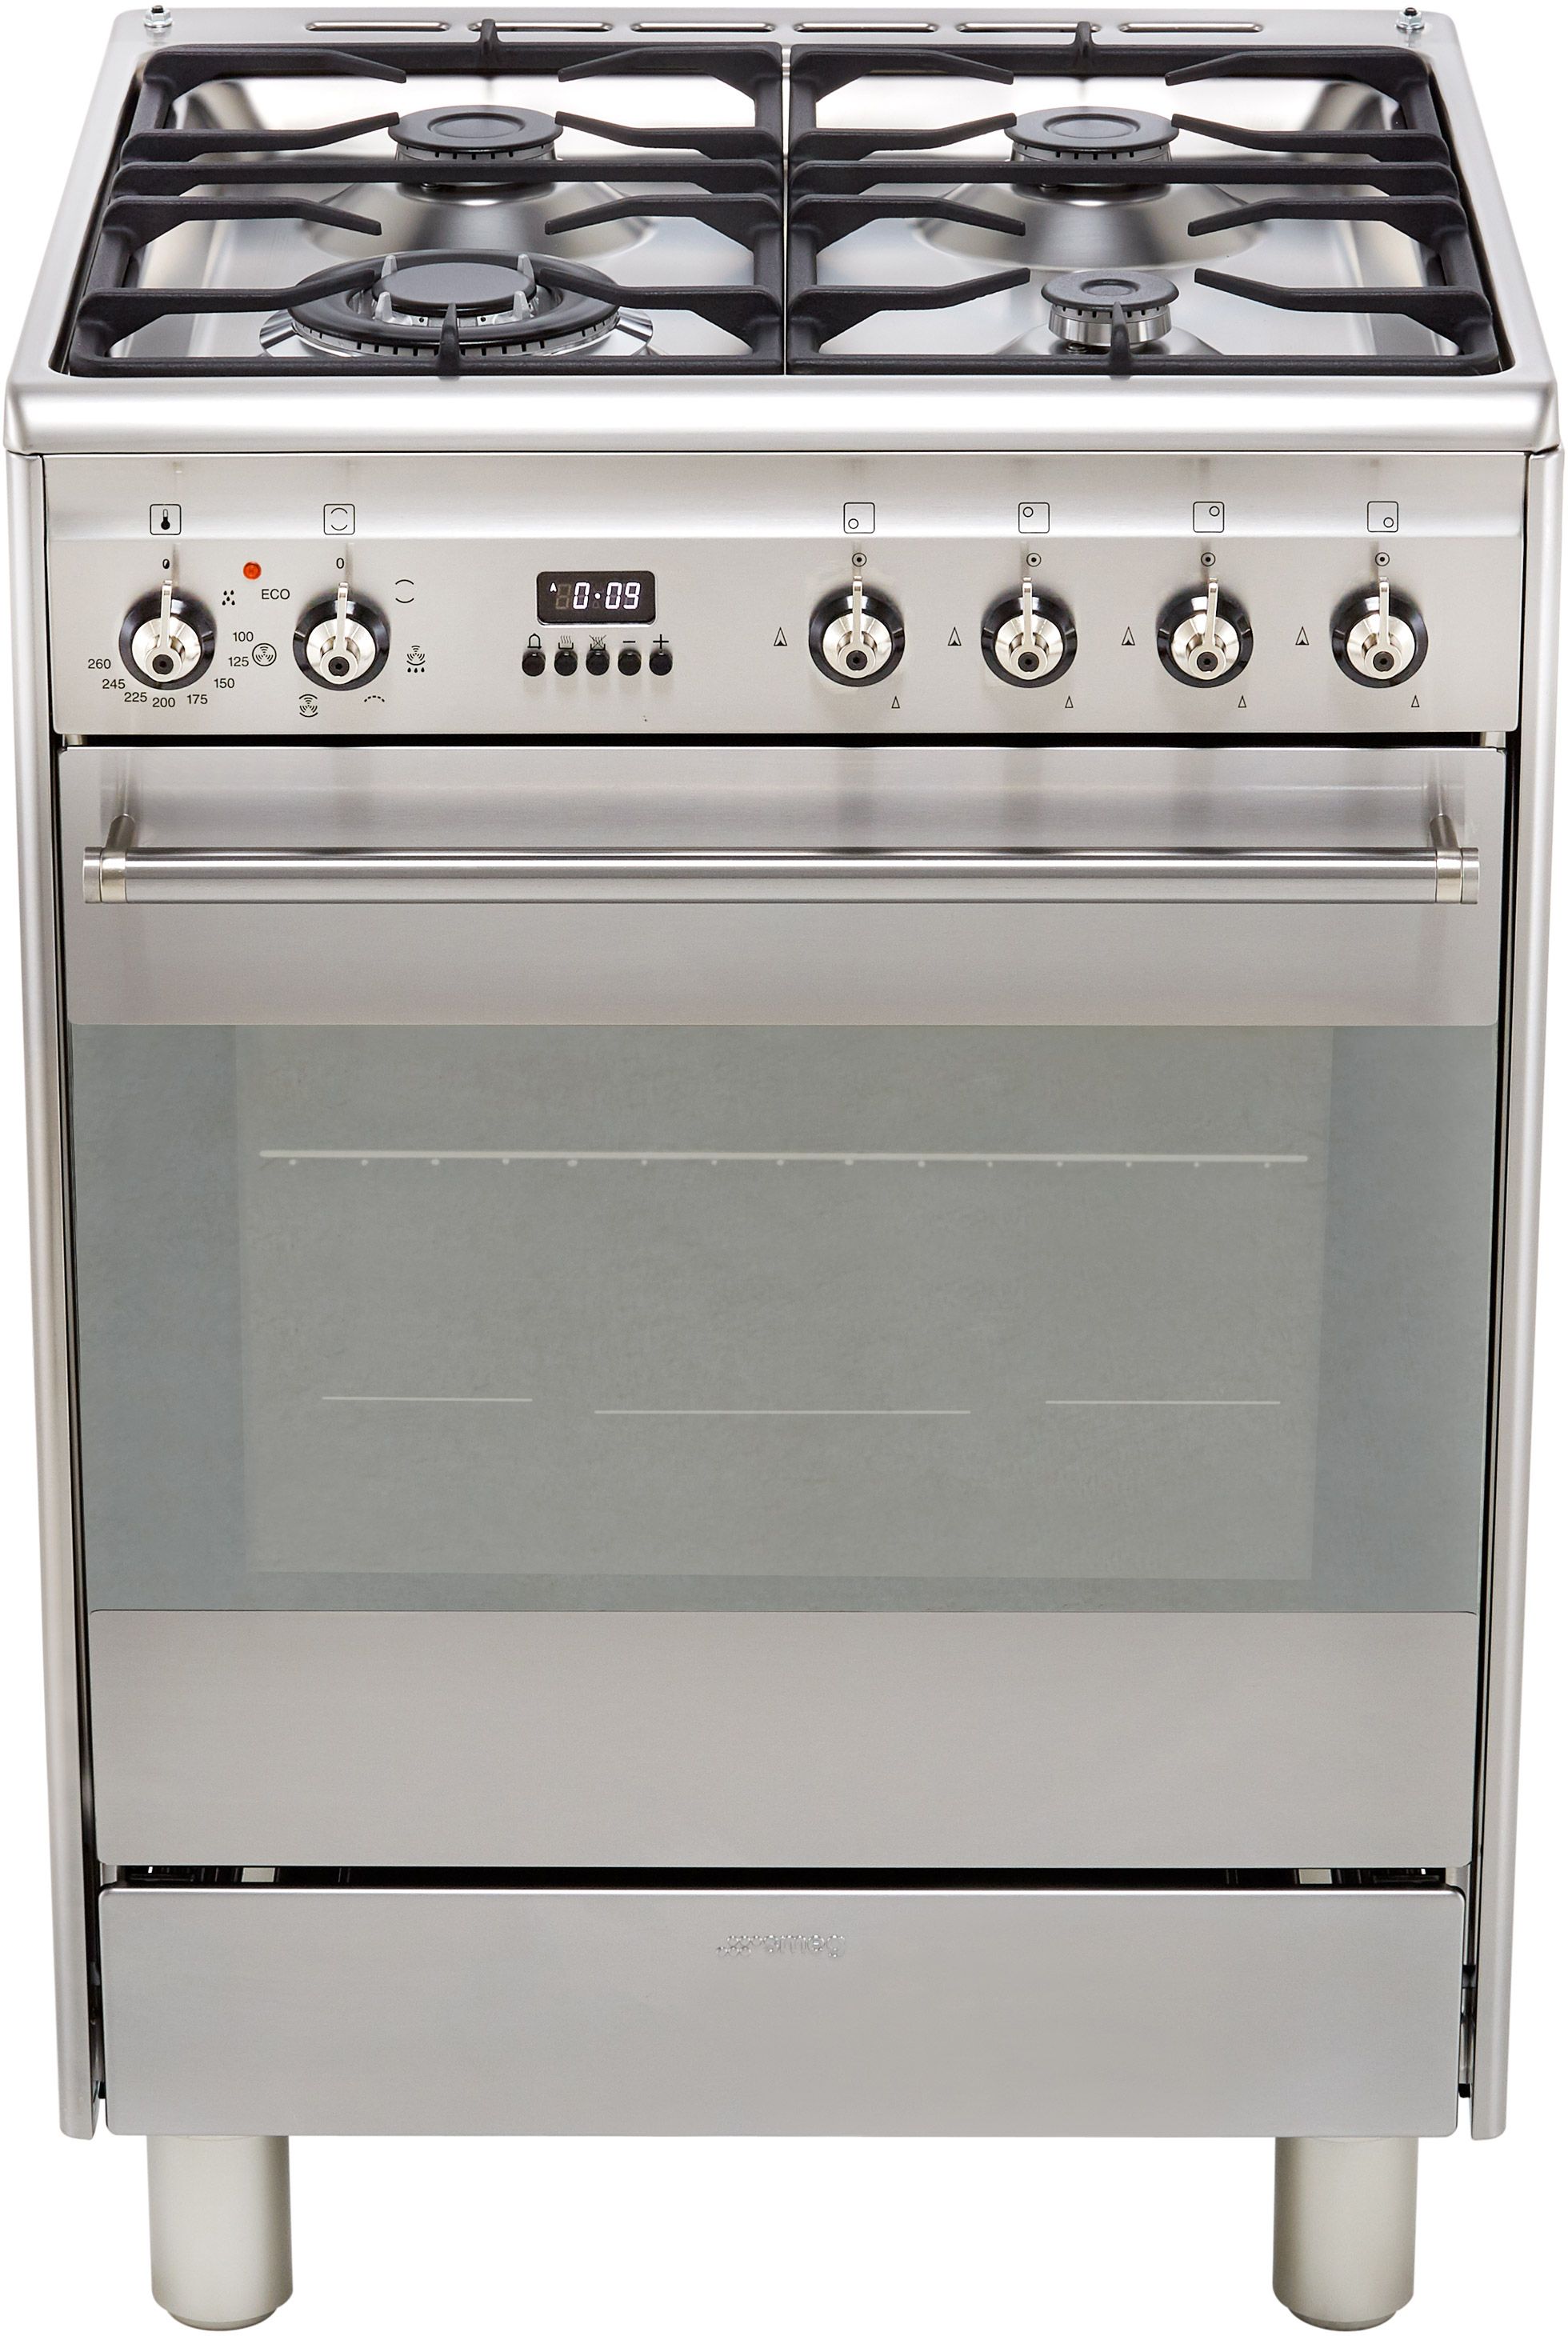 Smeg Concert SUK61MX9 60cm Freestanding Dual Fuel Cooker - Stainless Steel - A Rated, Stainless Steel